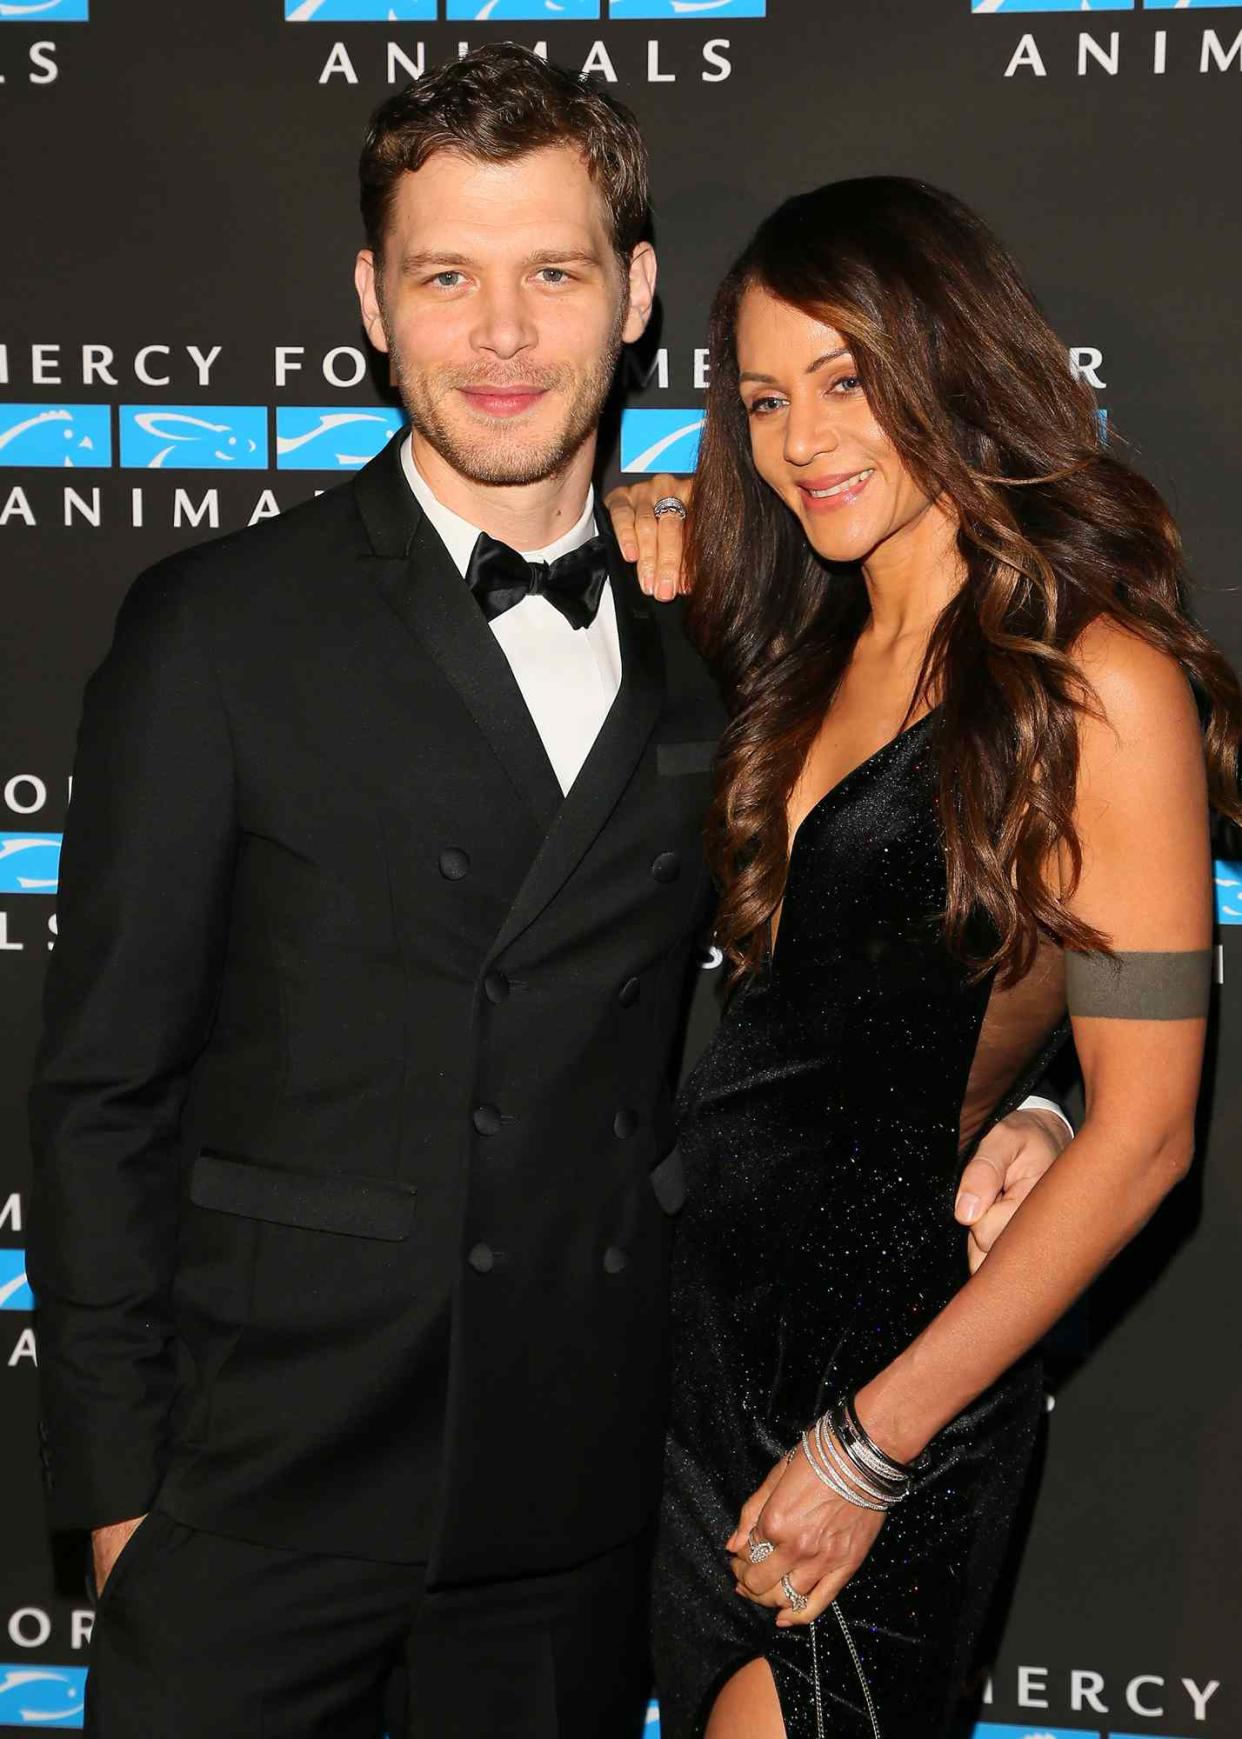 Joseph Morgan and Persia White attend the Mercy For Animals' Annual Hidden Heroes Gala on September 23, 2017 in Los Angeles, California